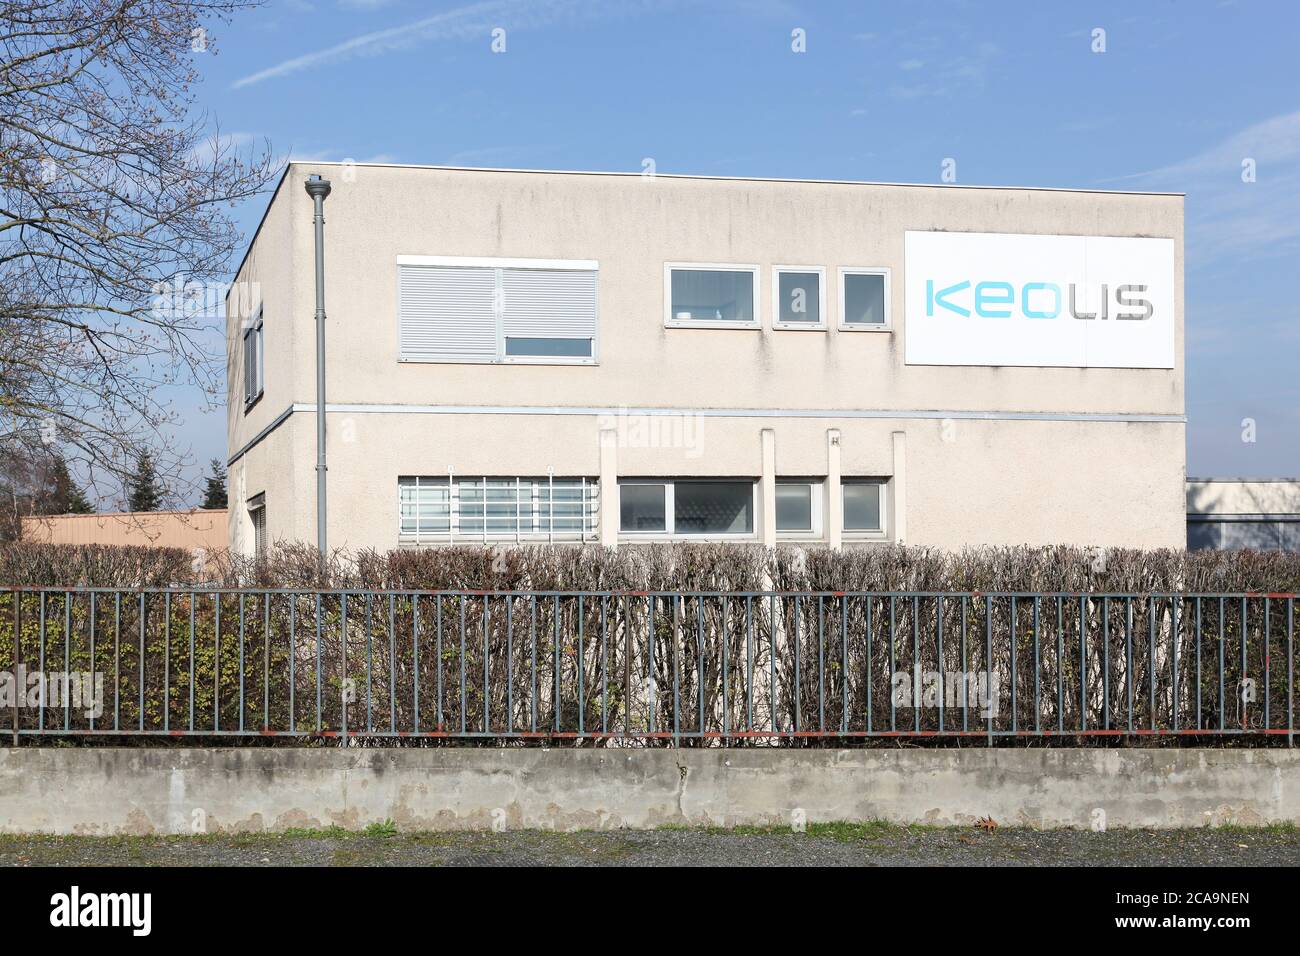 Arnas, France - January 19, 2019: Keolis office building. Keolis is the largest private sector French transport group Stock Photo